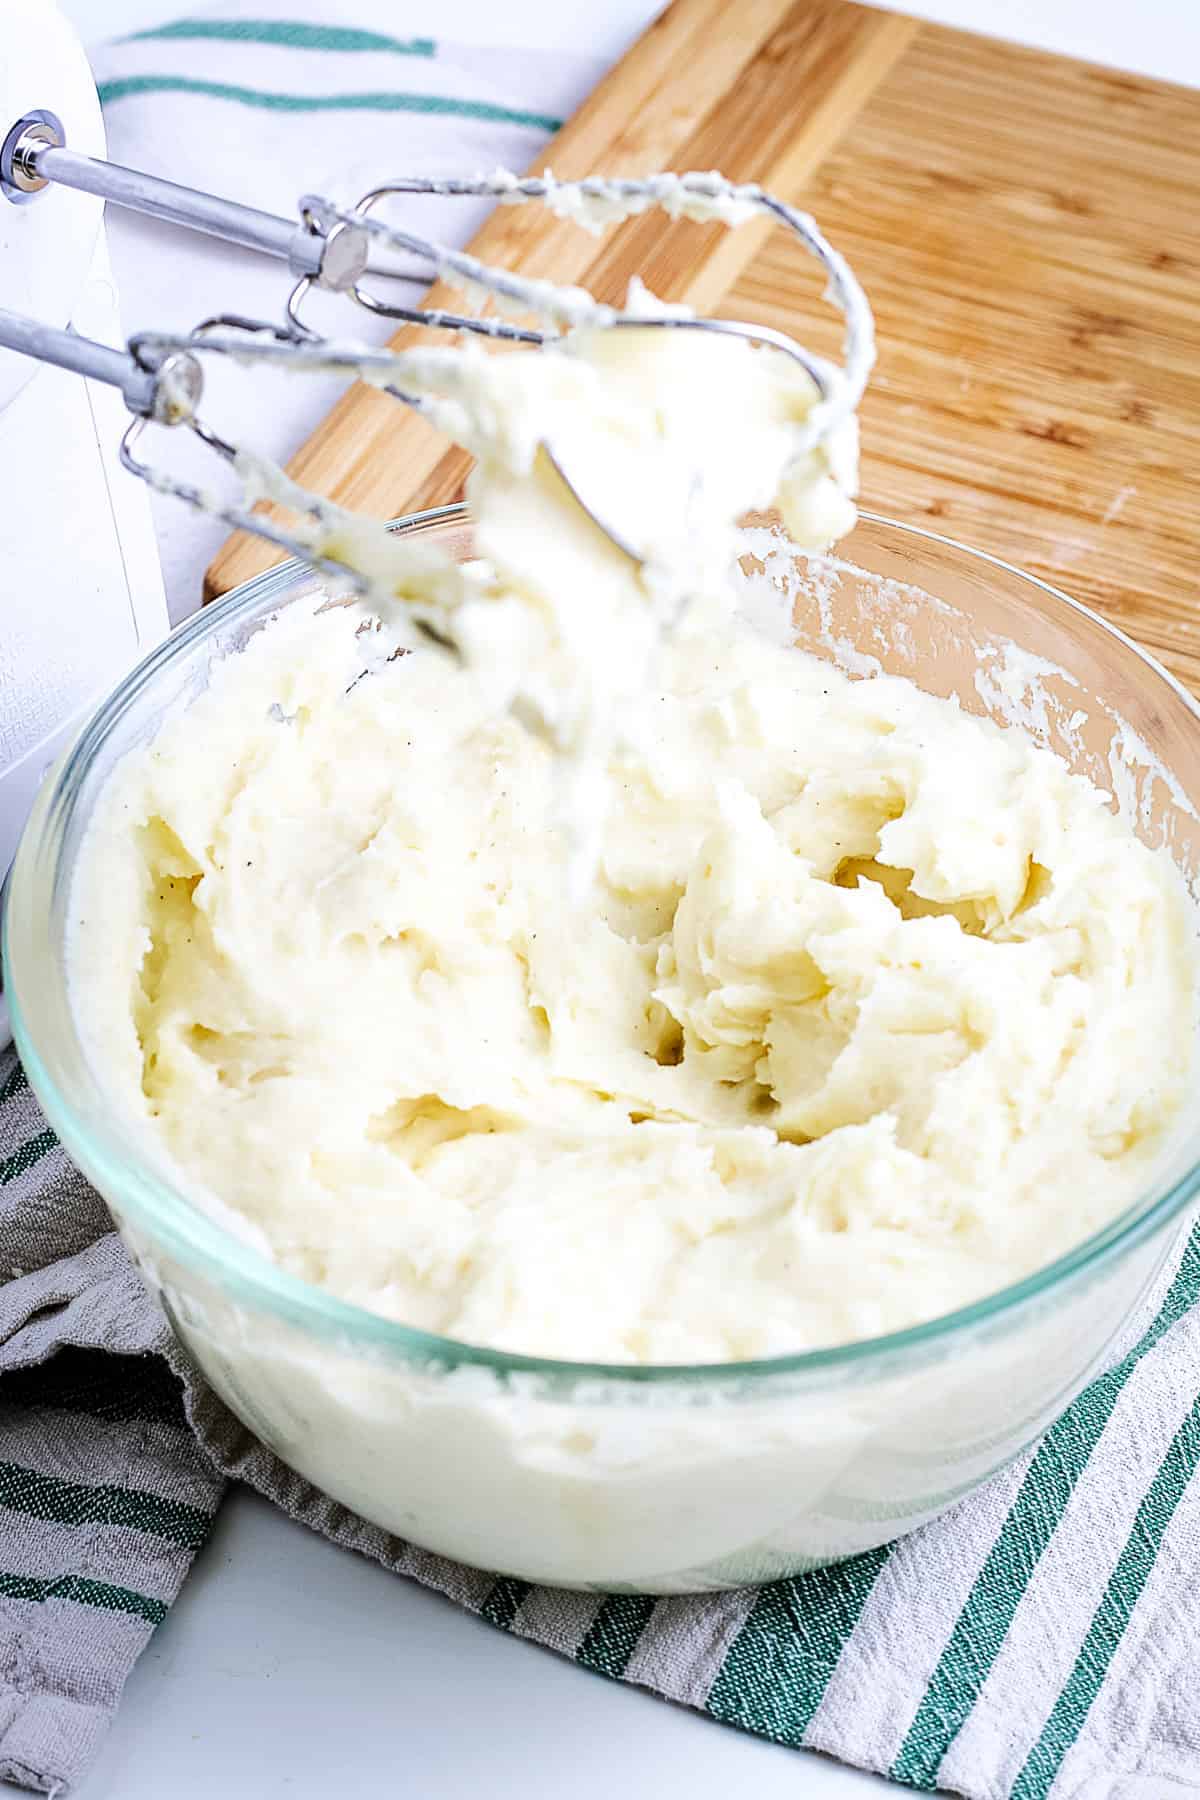 Glass bowl with hand mixer making mashed potatoes